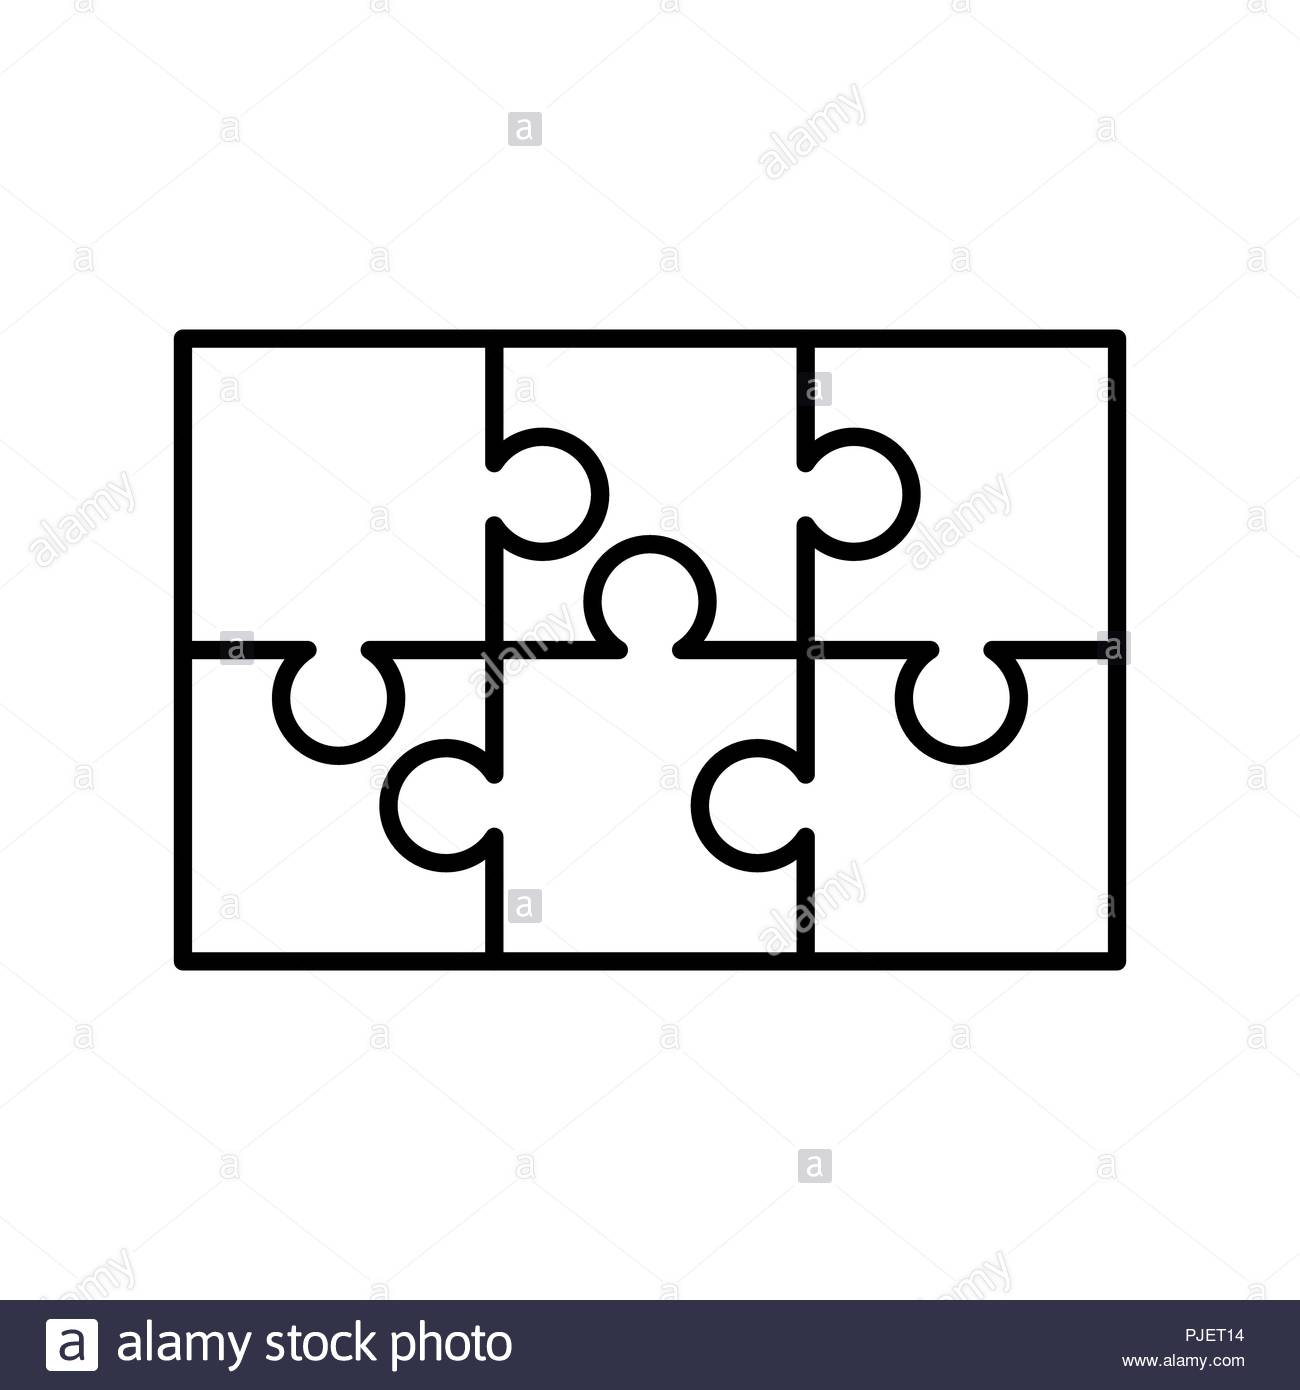 6 White Puzzles Pieces Arranged In A Rectangle Shape. Jigsaw Puzzle - 6 Piece Printable Puzzle